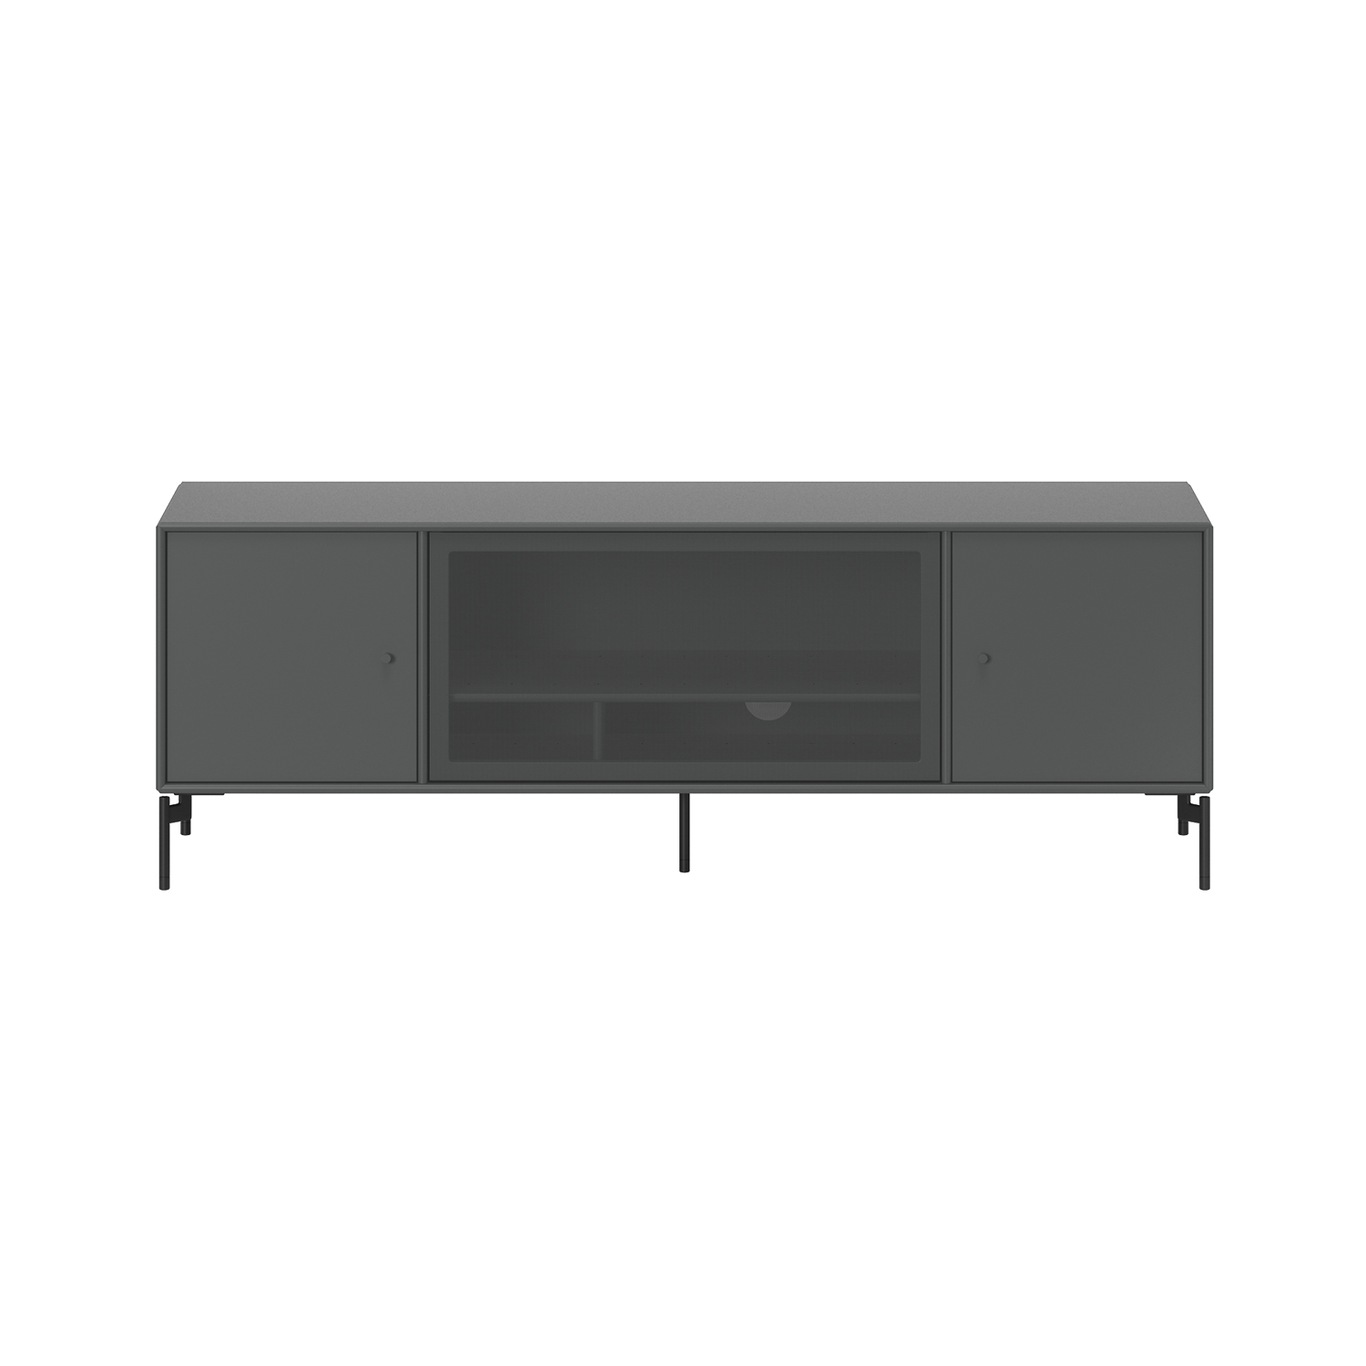 Octave III Media Bench, Anthracite